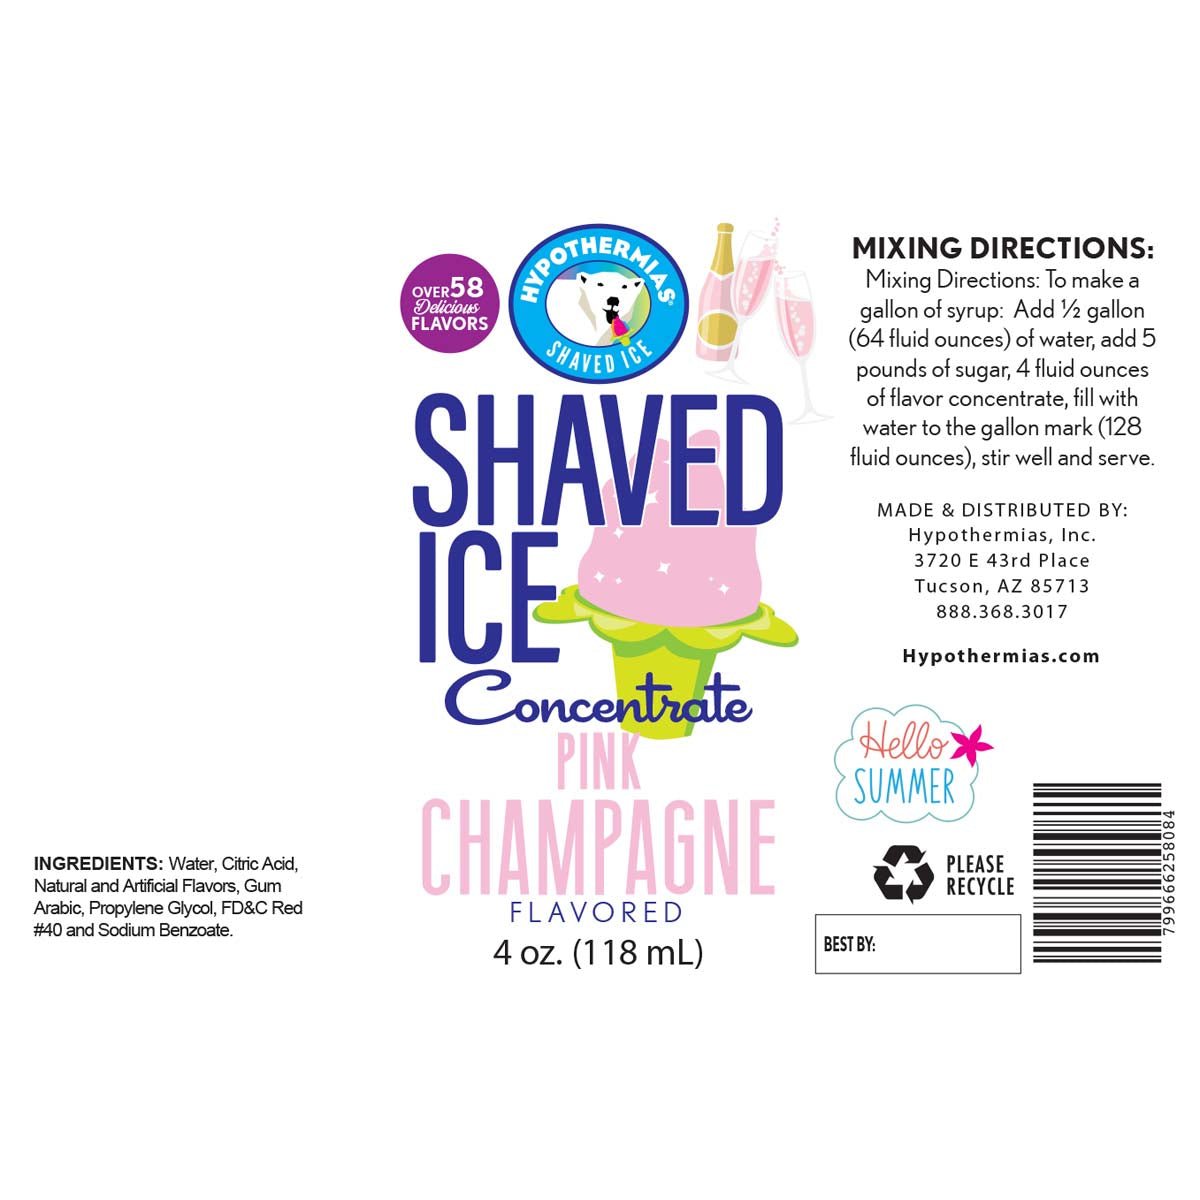 Hypothermias pink champagne shaved ice or snow cone flavor syrup concentrate ingredient label.